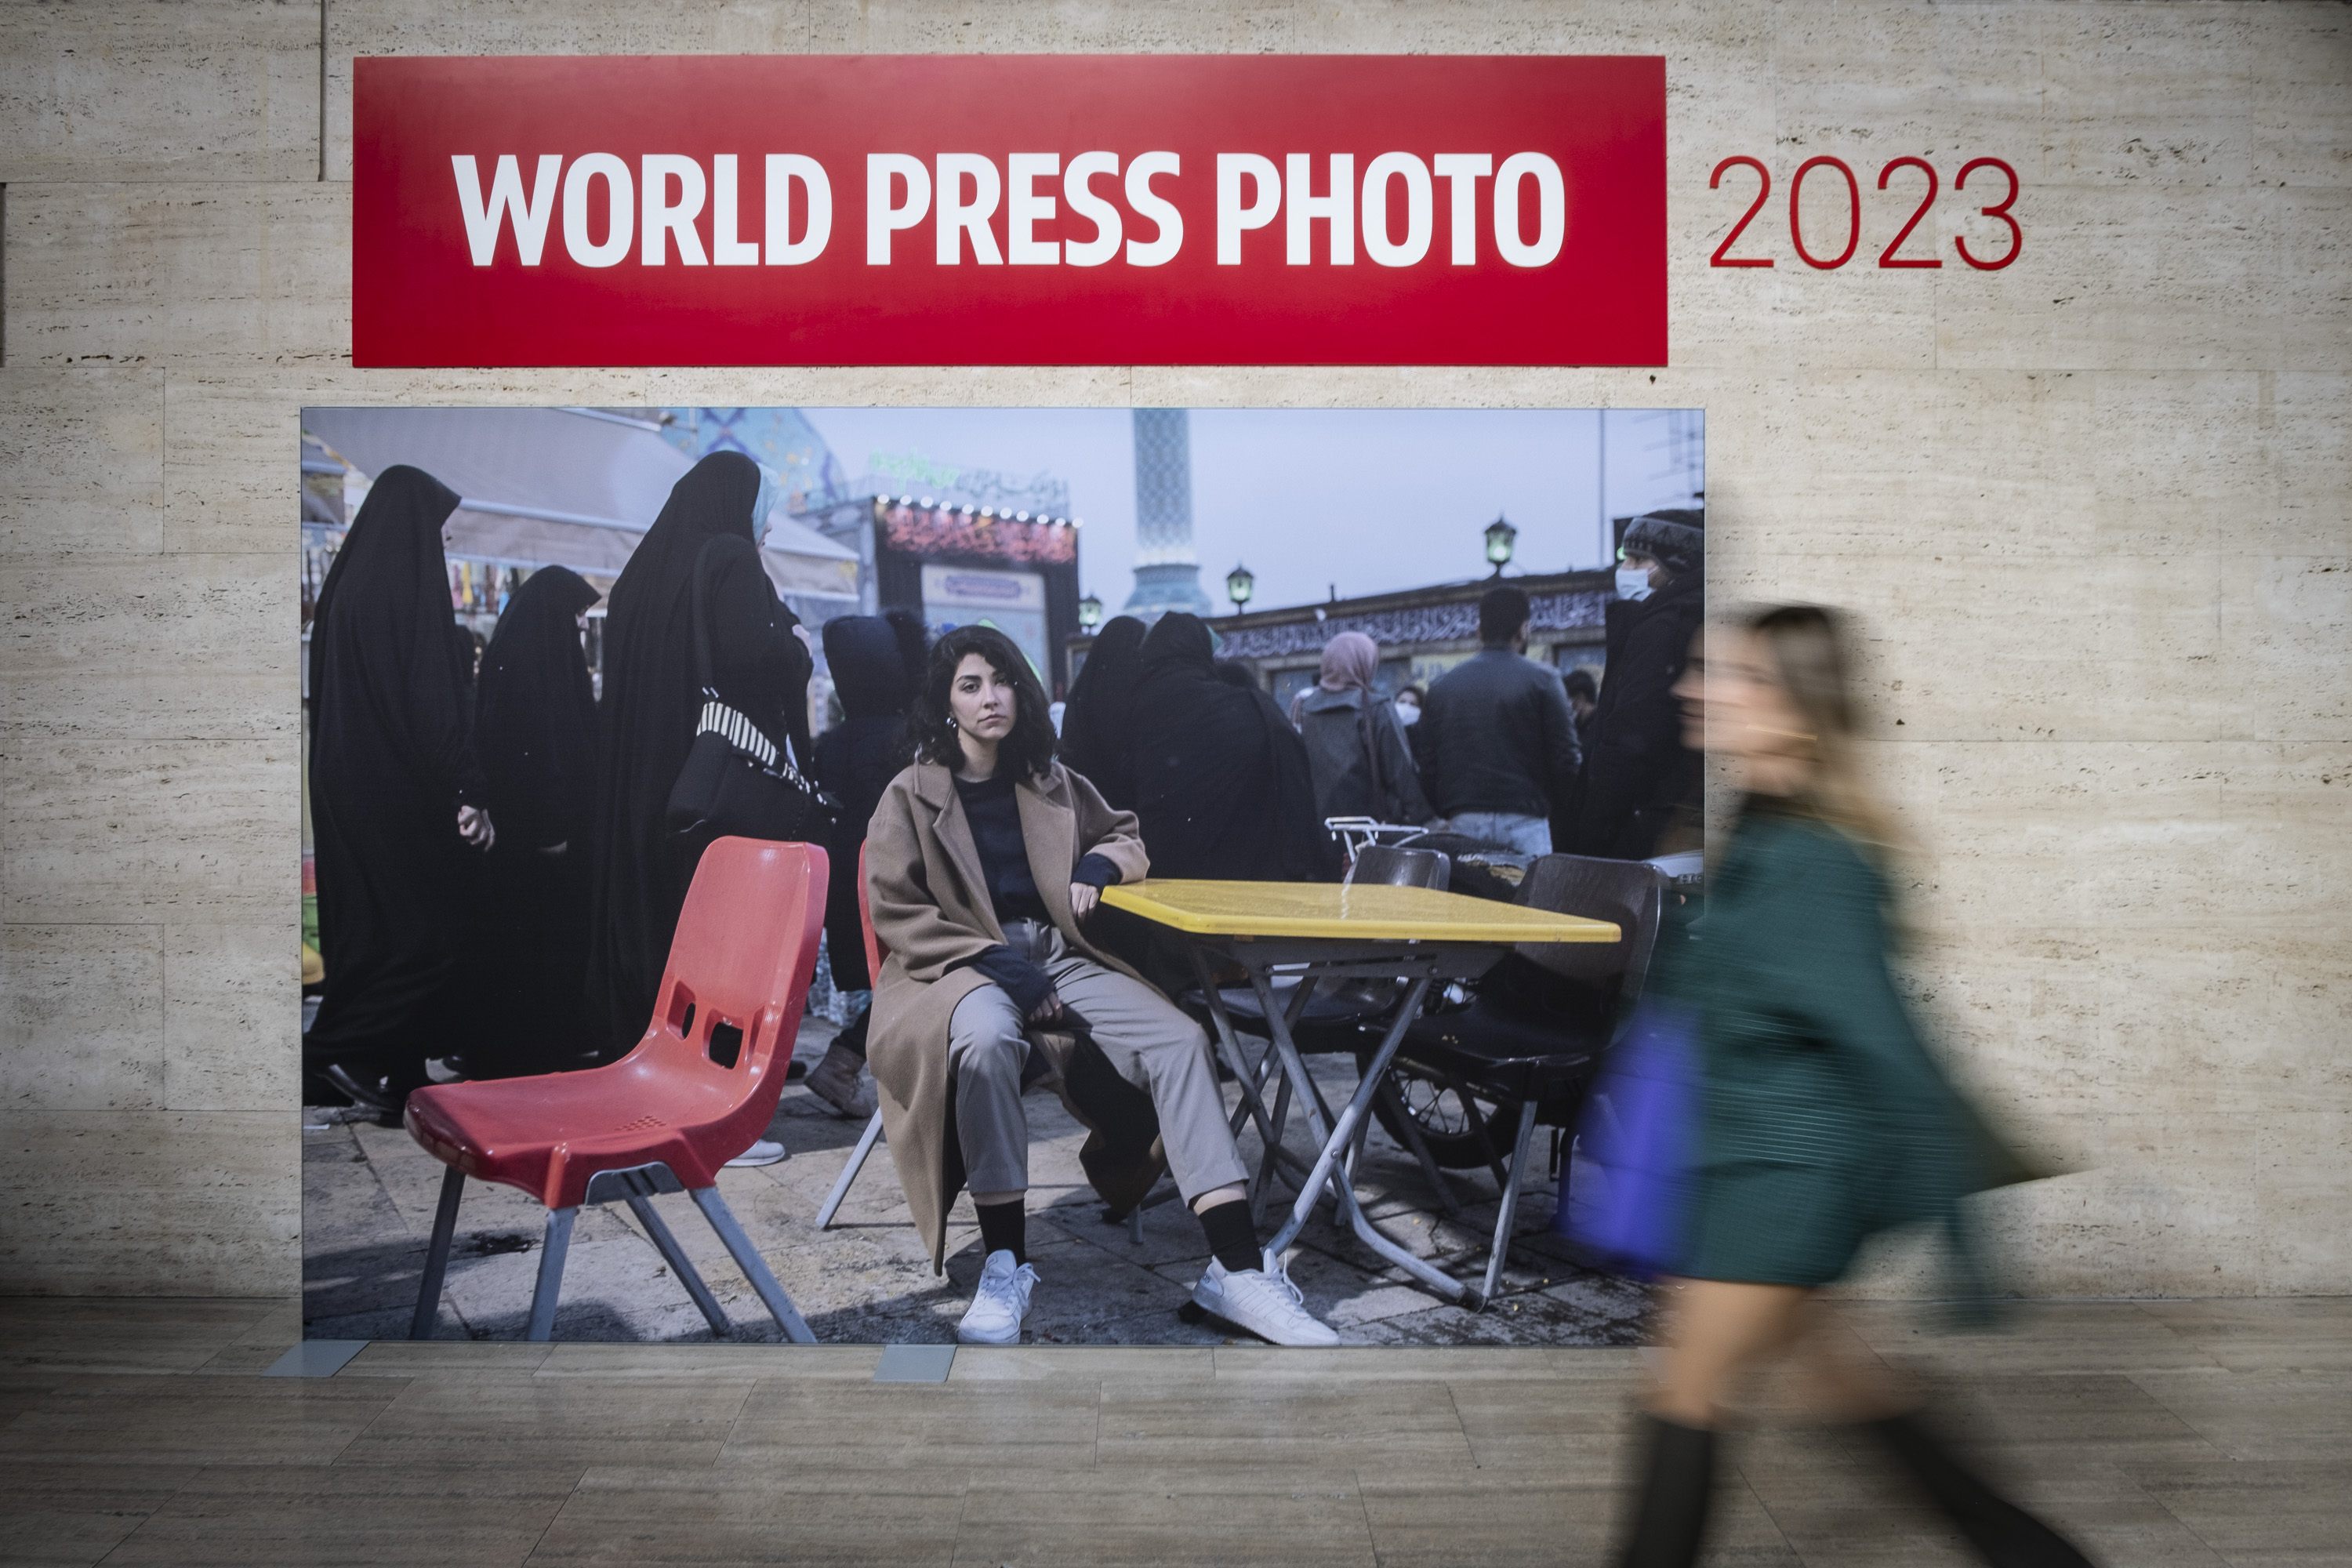 The tragedy of Ukraine, the Iranian protests: World Press Photo 2023 comes to Barcelona